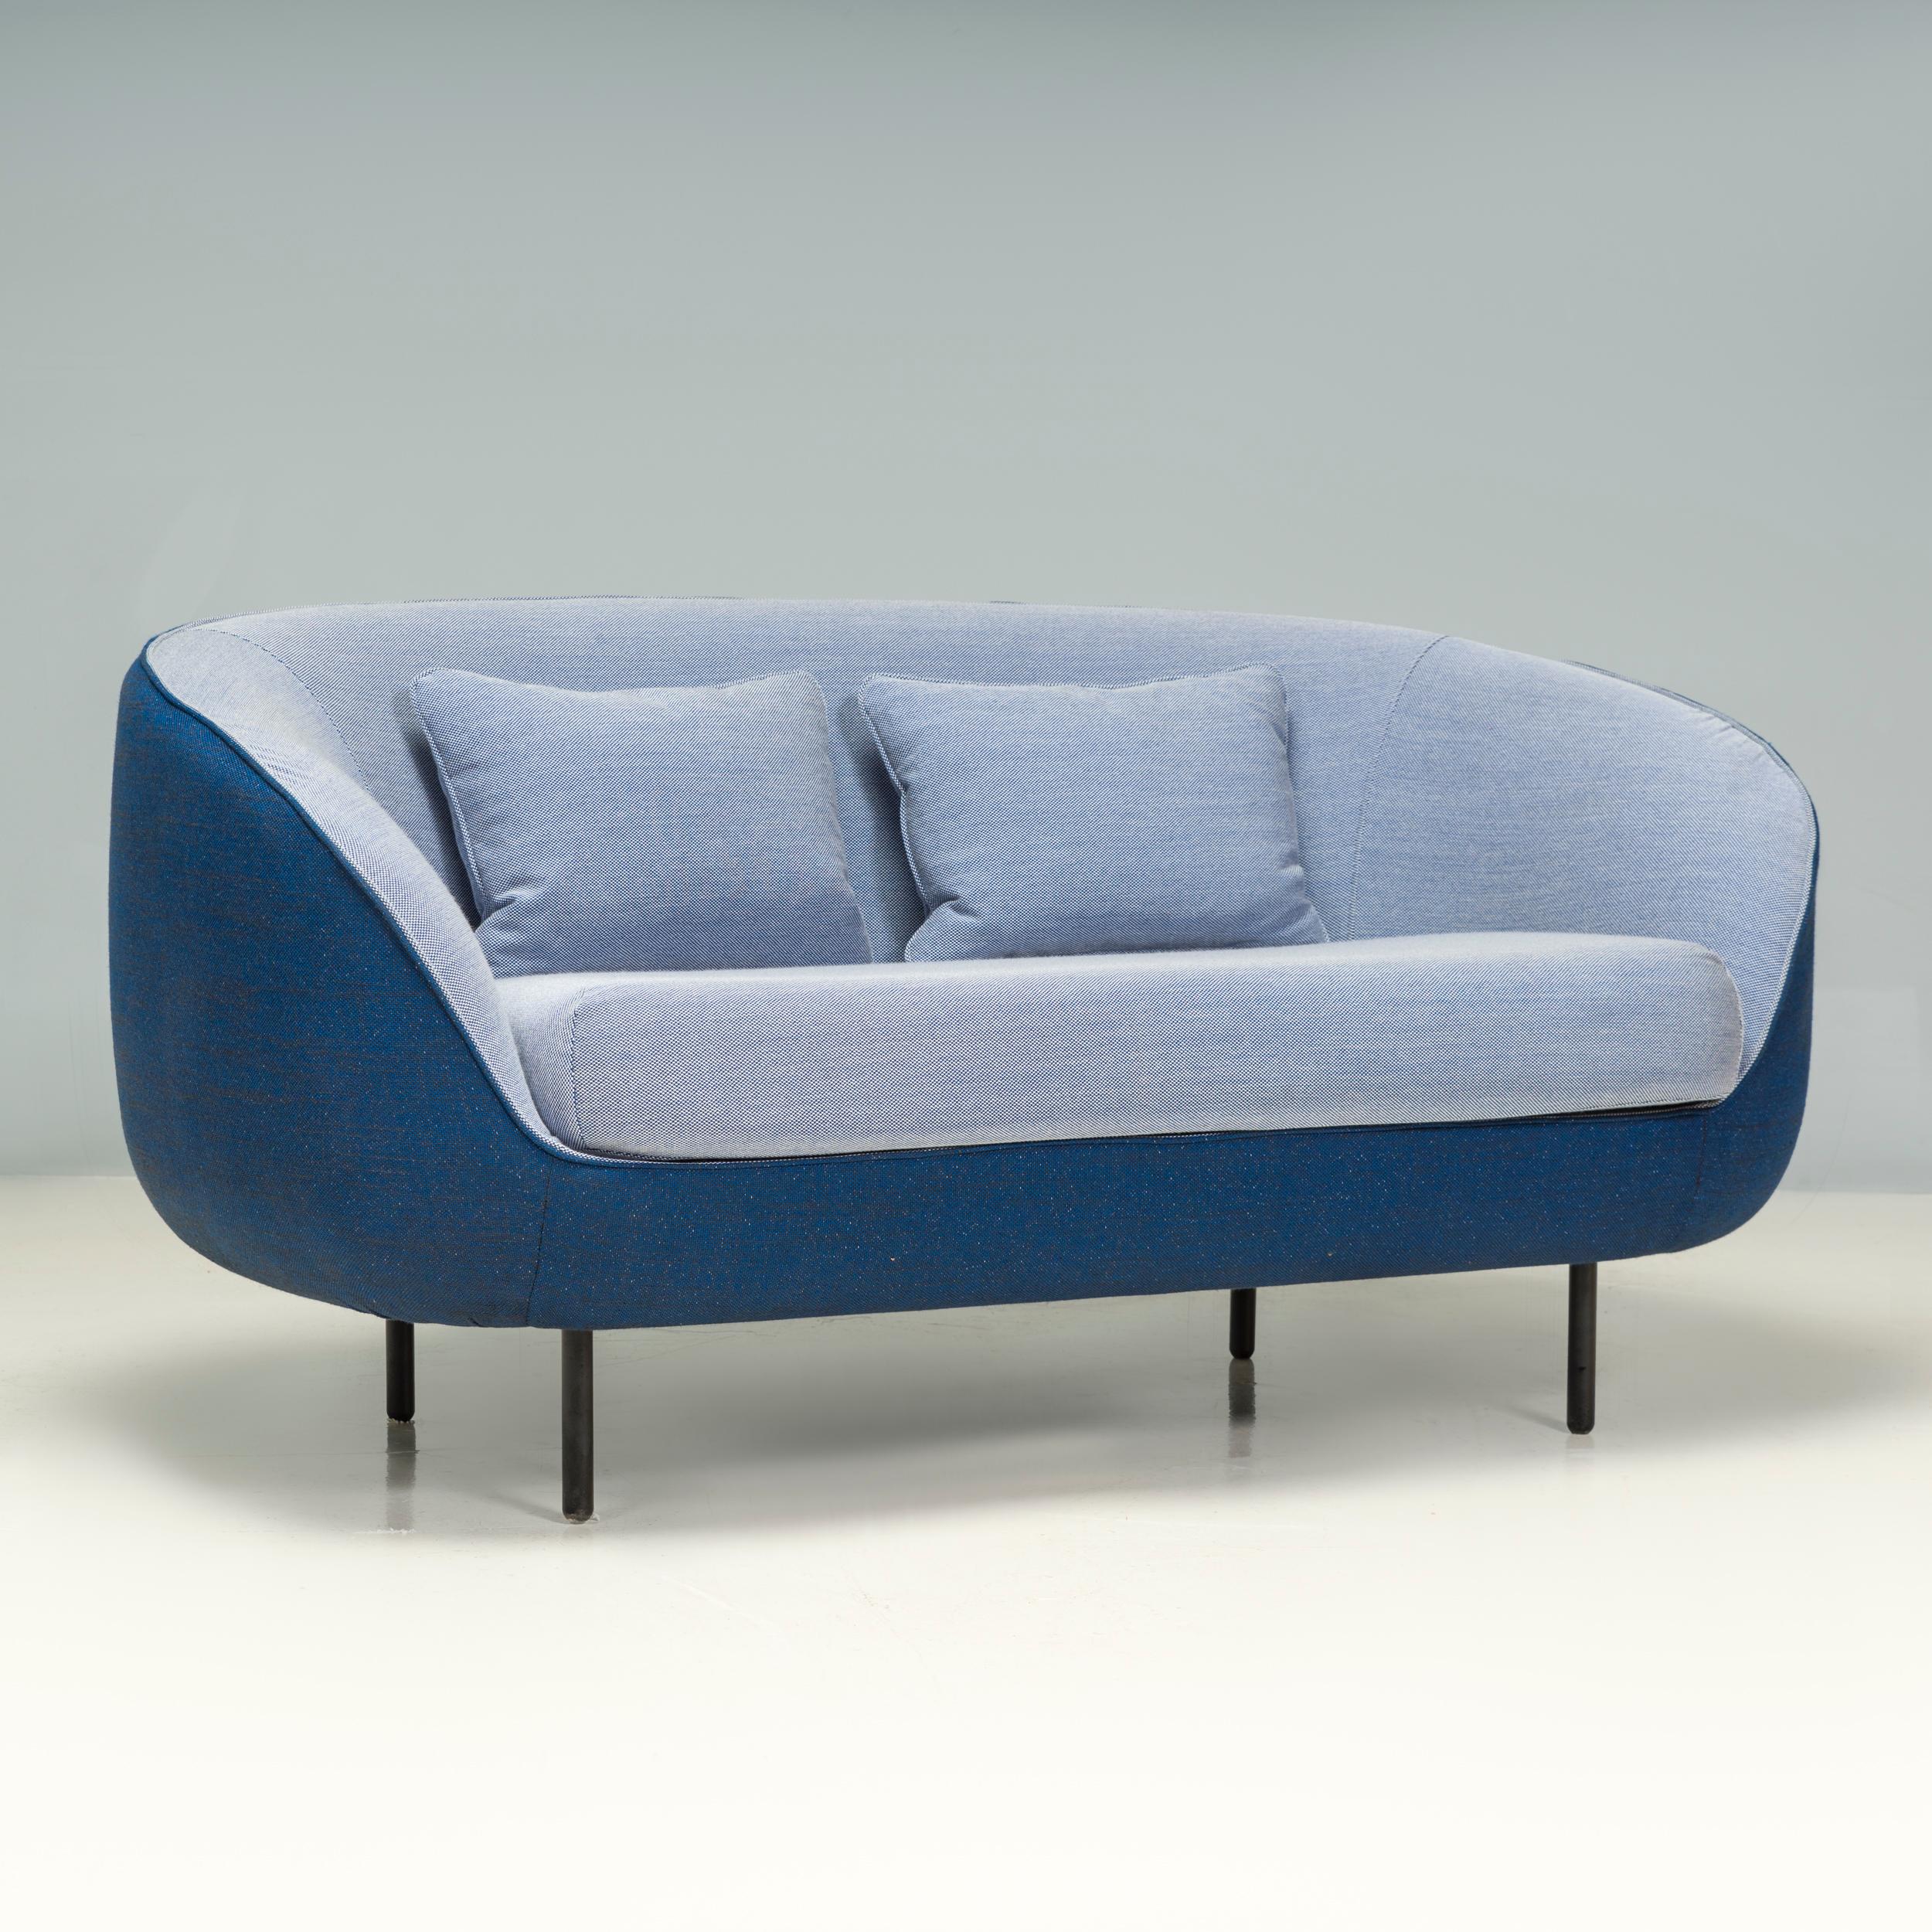 Originally designed by GamFratesi for Danish furniture manufacturer Fredericia in 2012, this Haiku sofa was manufactured in 2018.

Perfectly balancing their Italian and Danish design backgrounds, the Haiku sofa is both contemporary and classic.

The